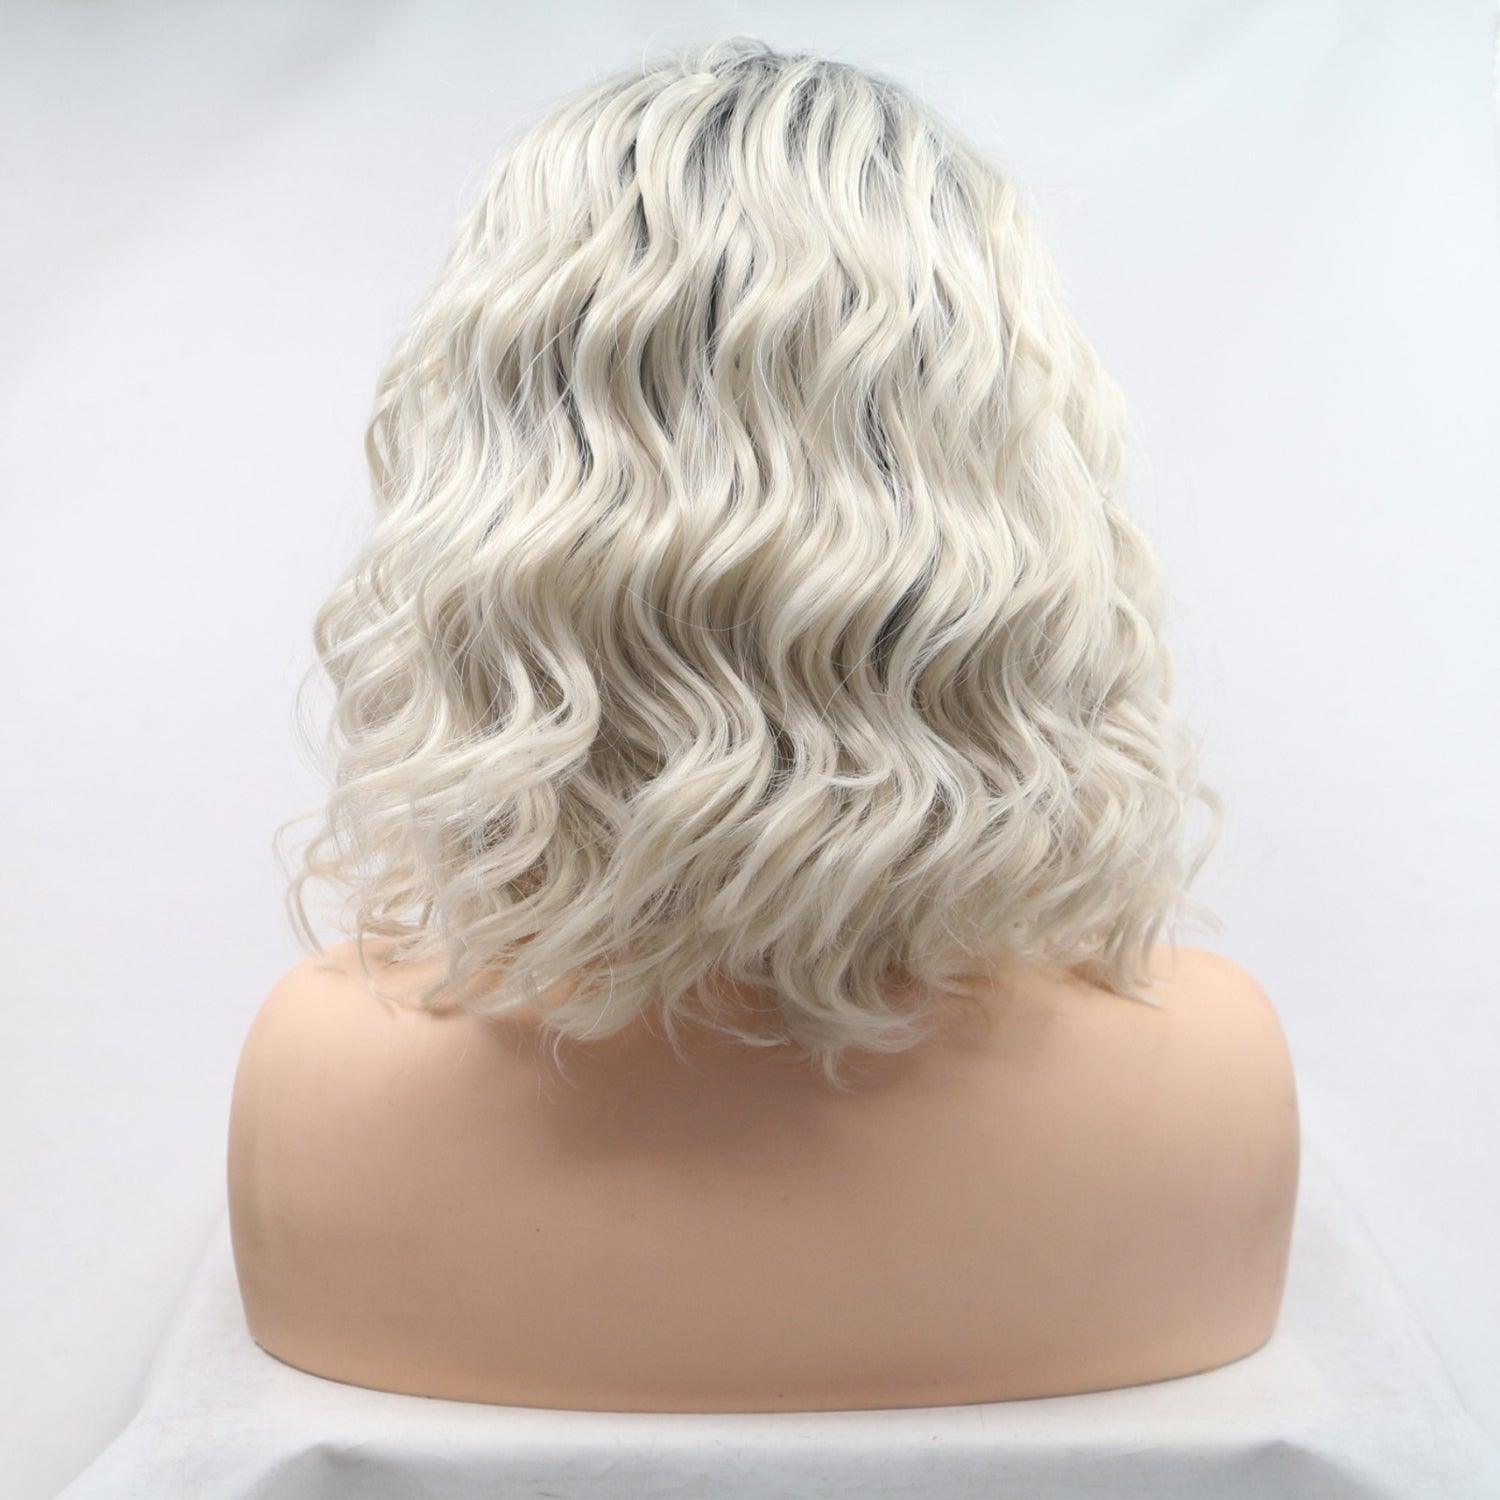 a wig with white hair on a mannequin head